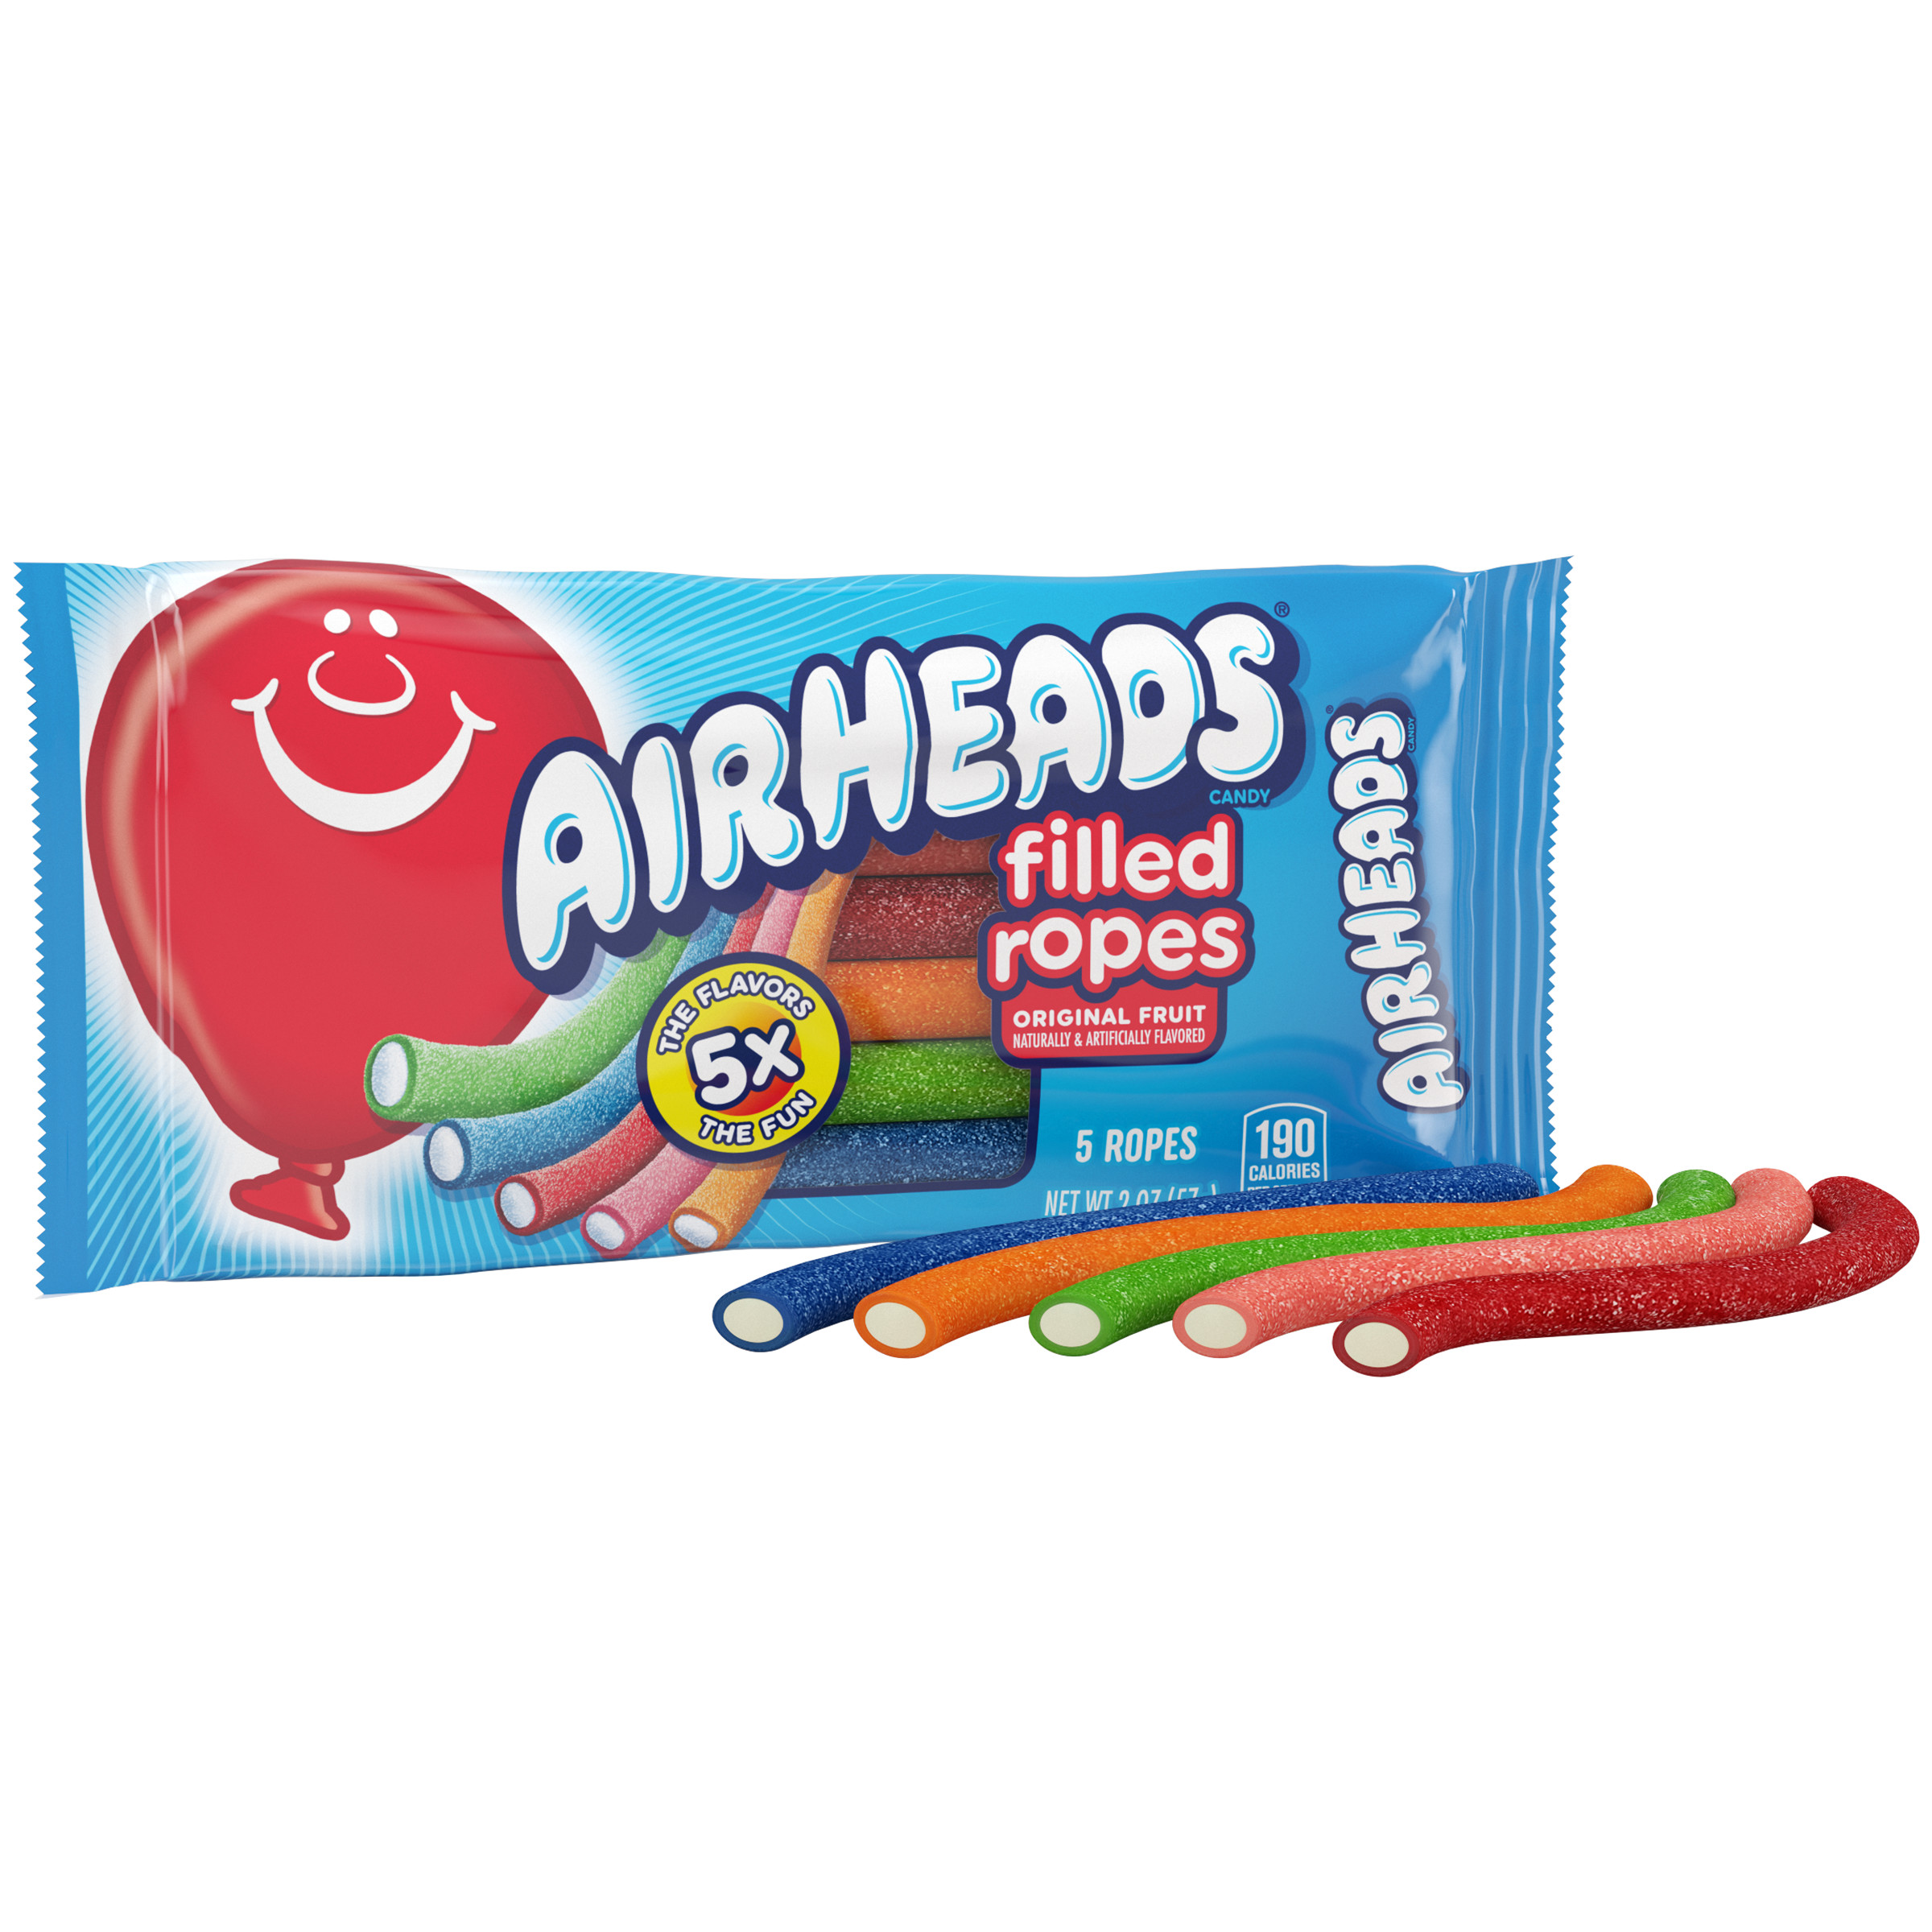 VAN MELLE - AIRHEADS FILLED ROPES 2 OZ 18 CT